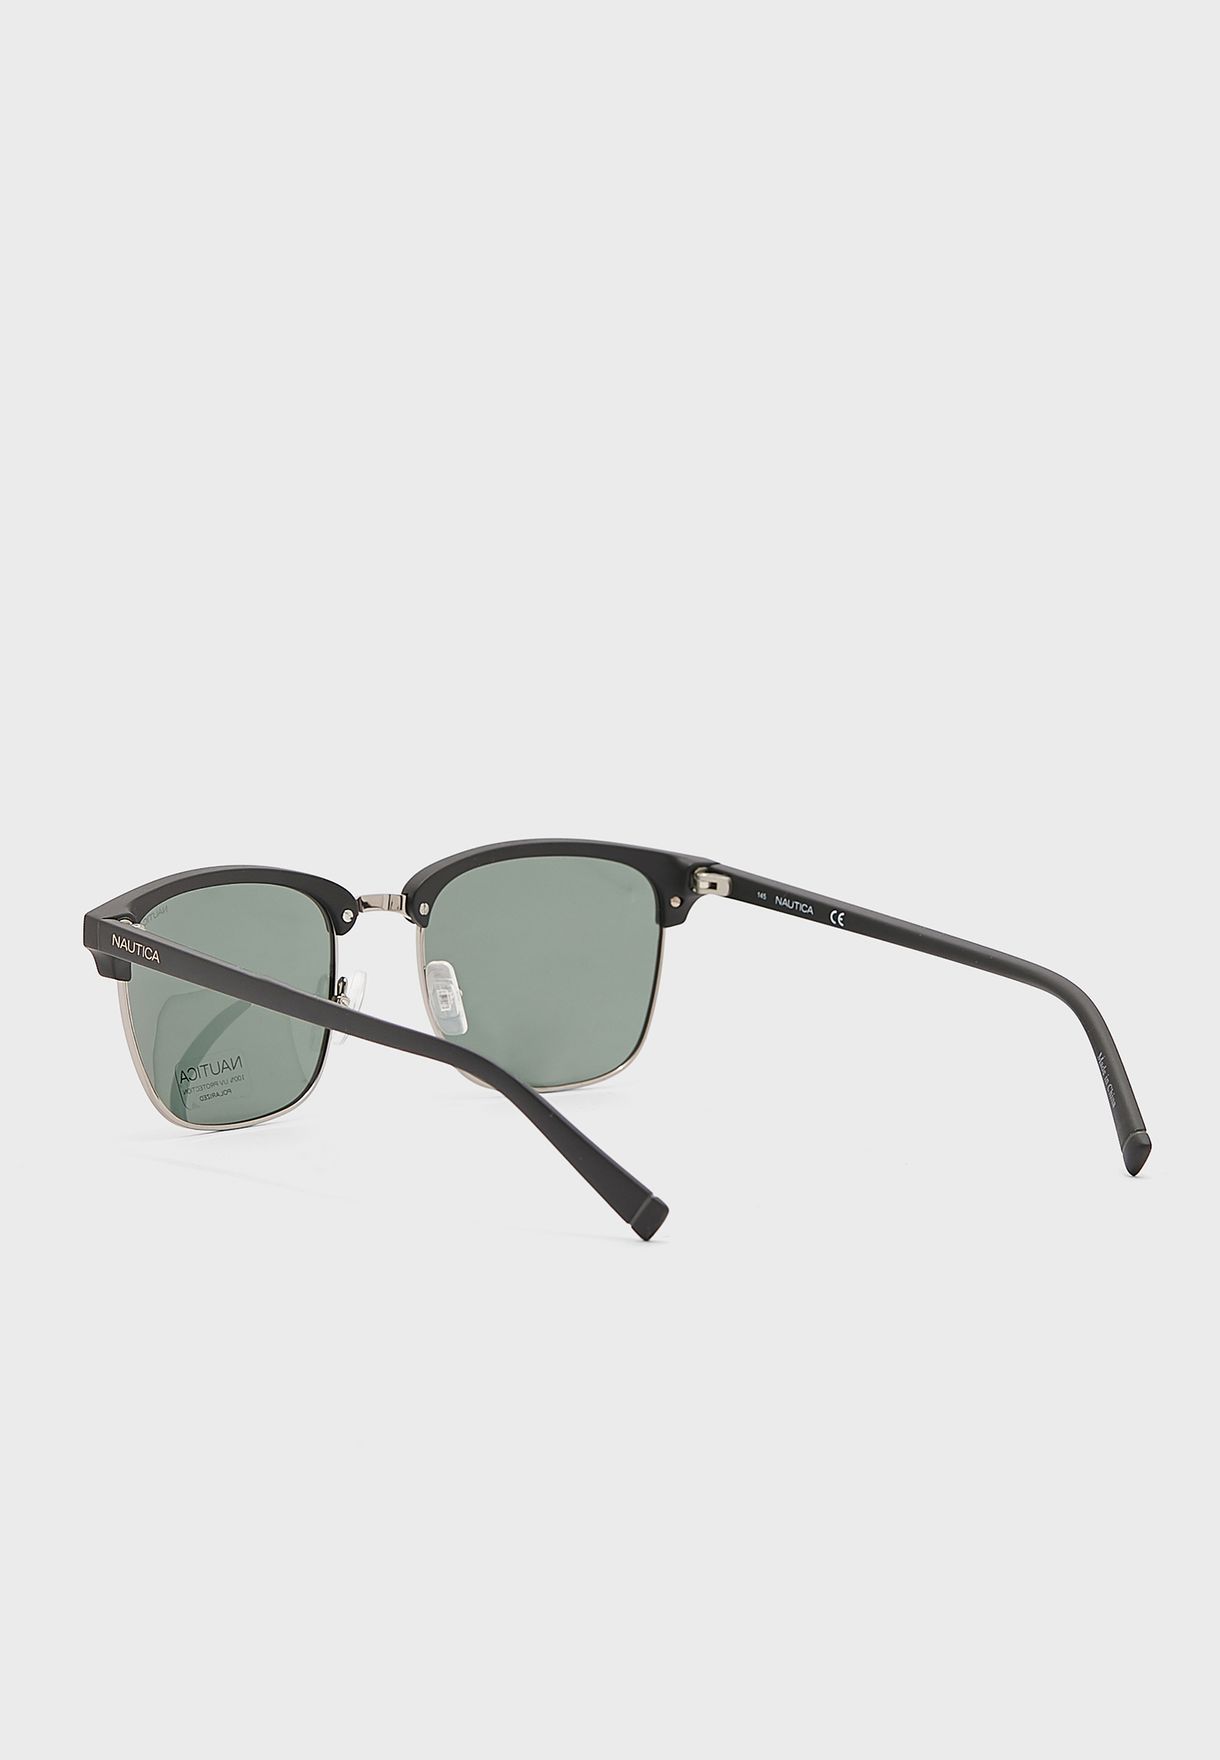 Clubmasters Sunglasses